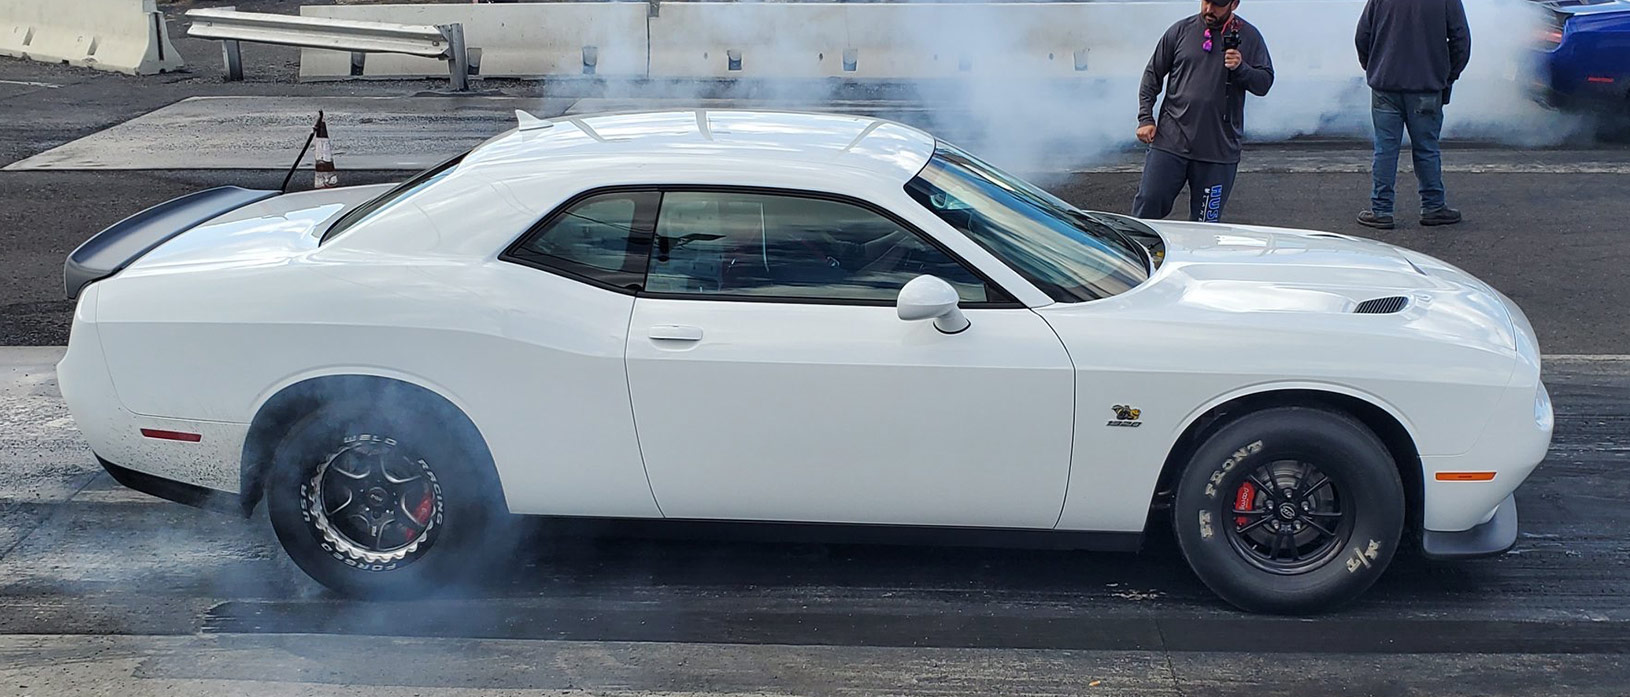 white challenger doing a burnout